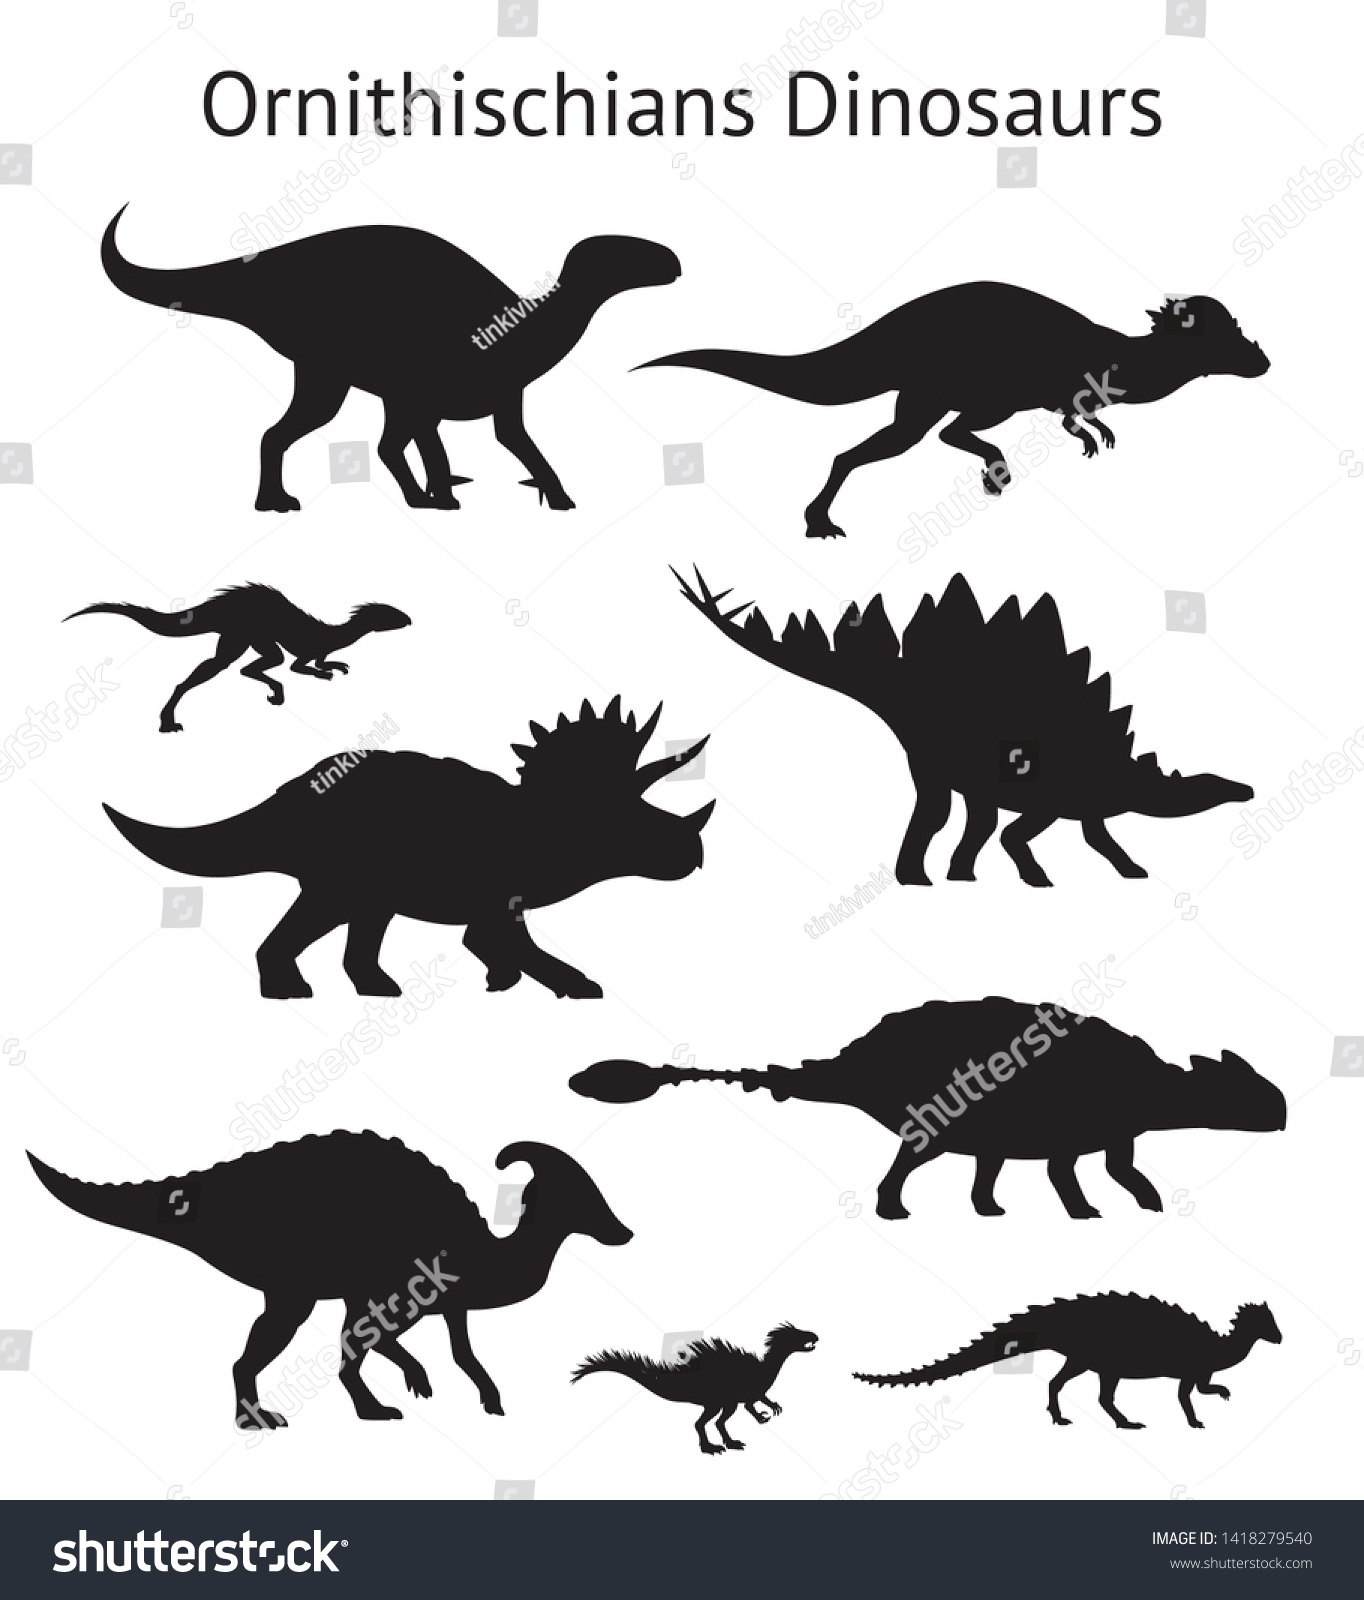 SVG of Silhouettes of ornithischian dinosaurs. Set. Side view. Monochrome vector illustration of black silhouettes of dinosaurs isolated on white background. Ornithischia. Proportional dimensions. svg